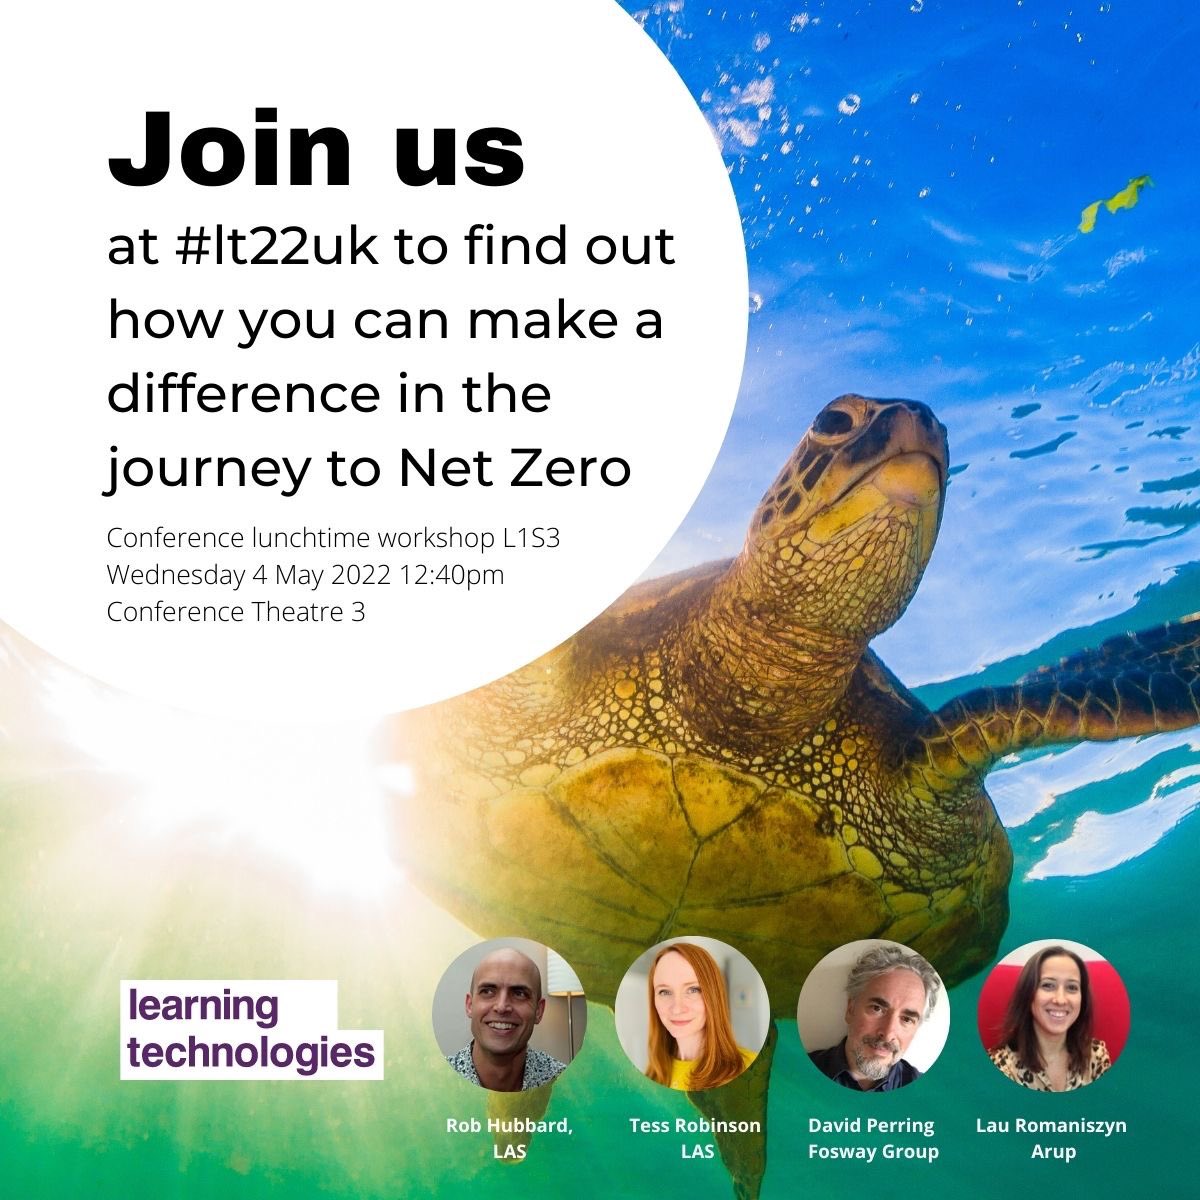 @tessrobinsonLAS and I will be hosting a lunchtime conference session at #LT22UK next Wednesday with @DavidPerring & Laura Romaniszyn. Let’s discuss how to make L&D greener. Come and join us. #LAS #LASLearningEvolution #Planet #NetZero #bcorp #environment #learninganddevelopment